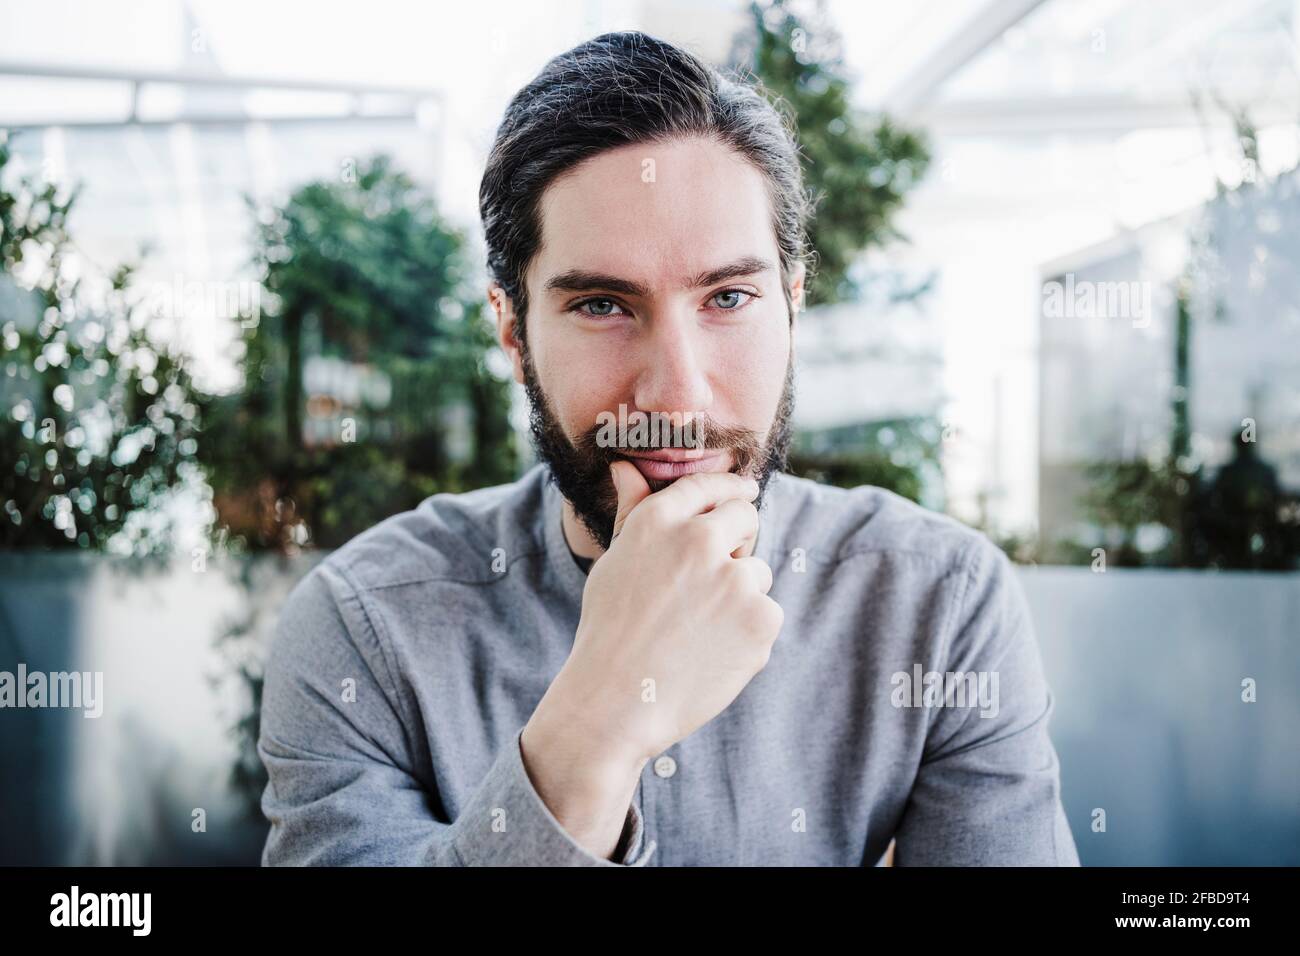 Handsome male businessperson with gray eyes at work place Stock Photo